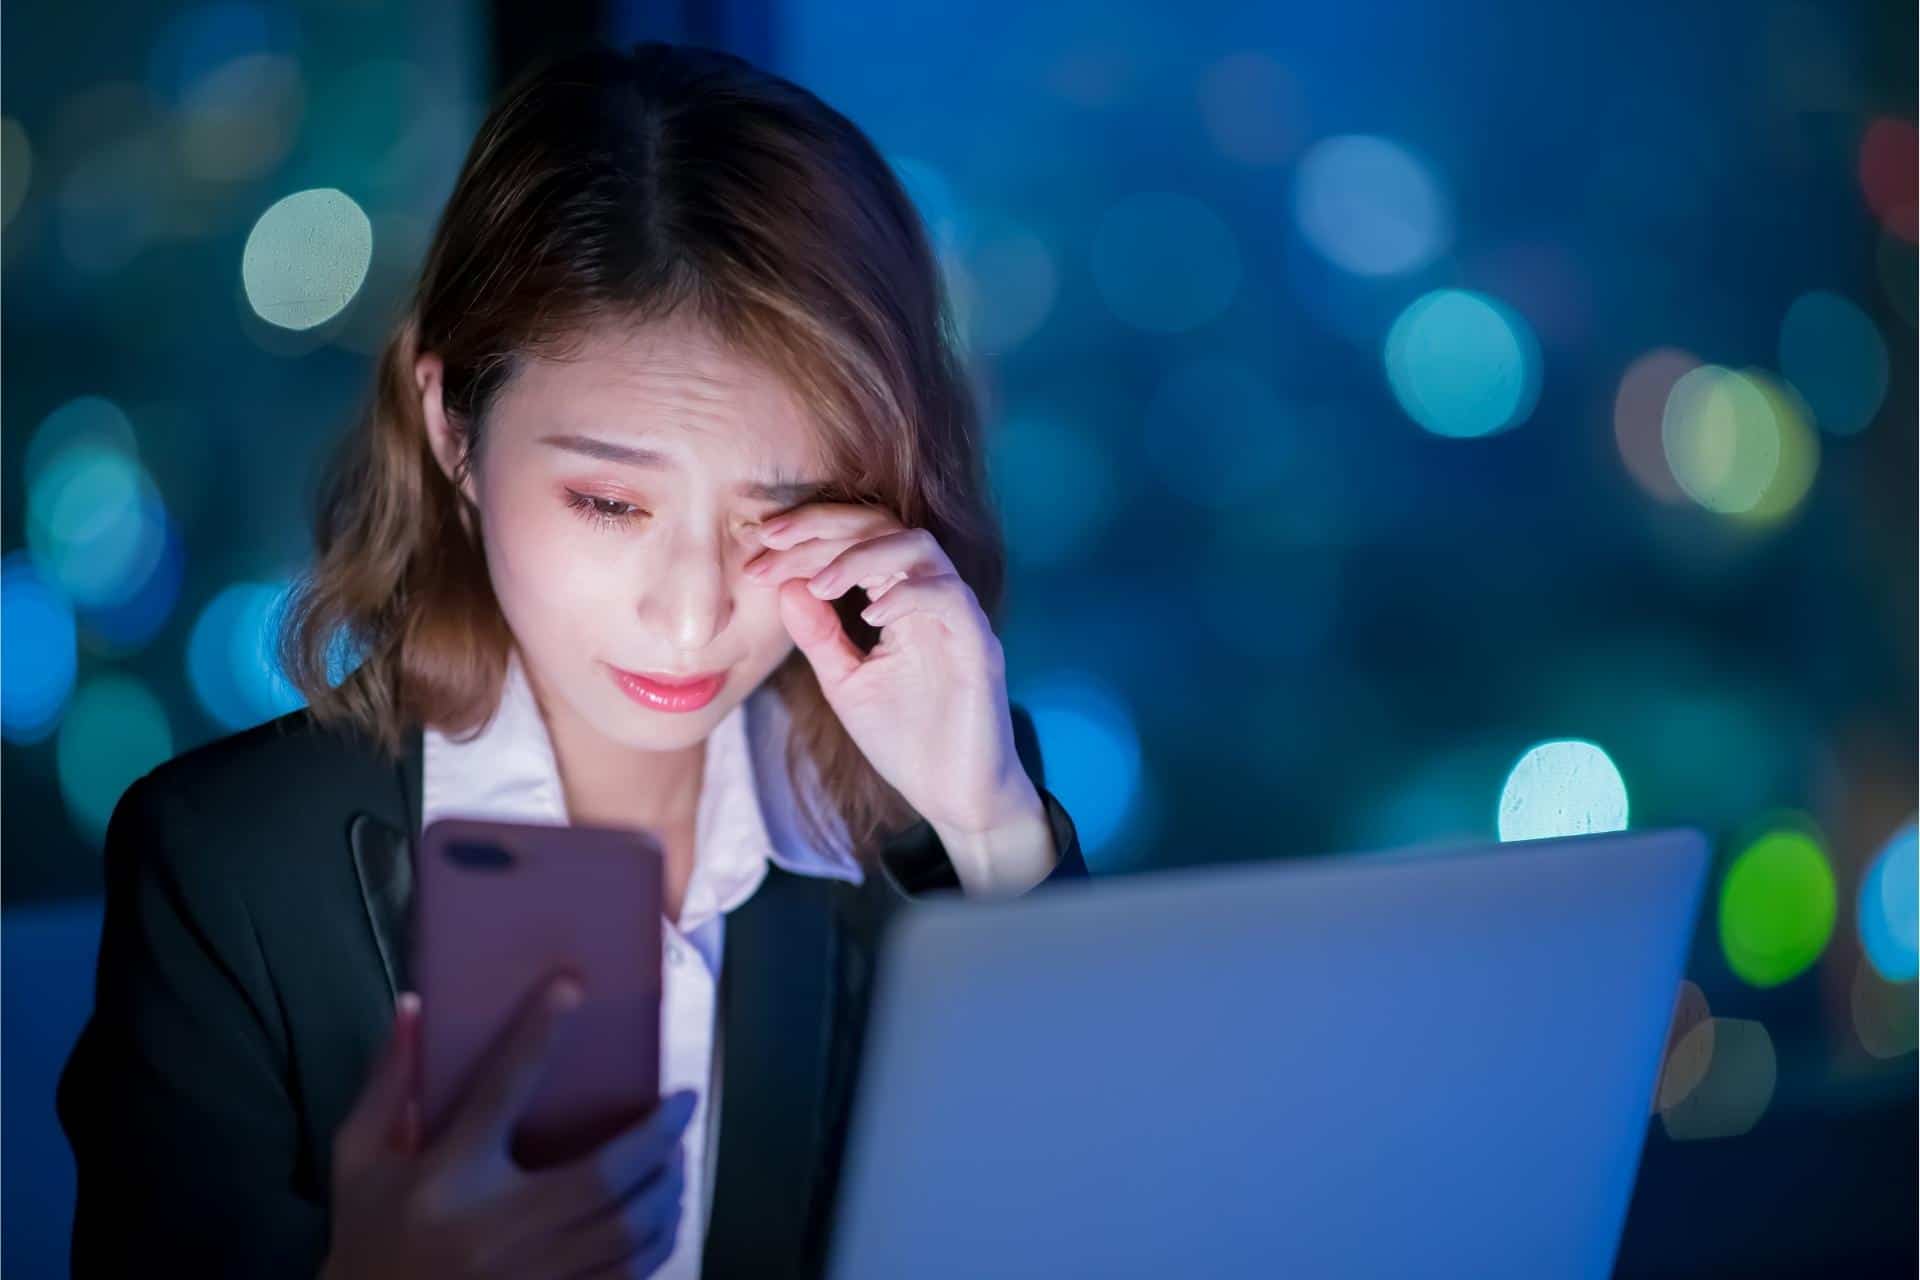 Professional woman using both laptop and smartphone at night, which may contribute to poor sleep.